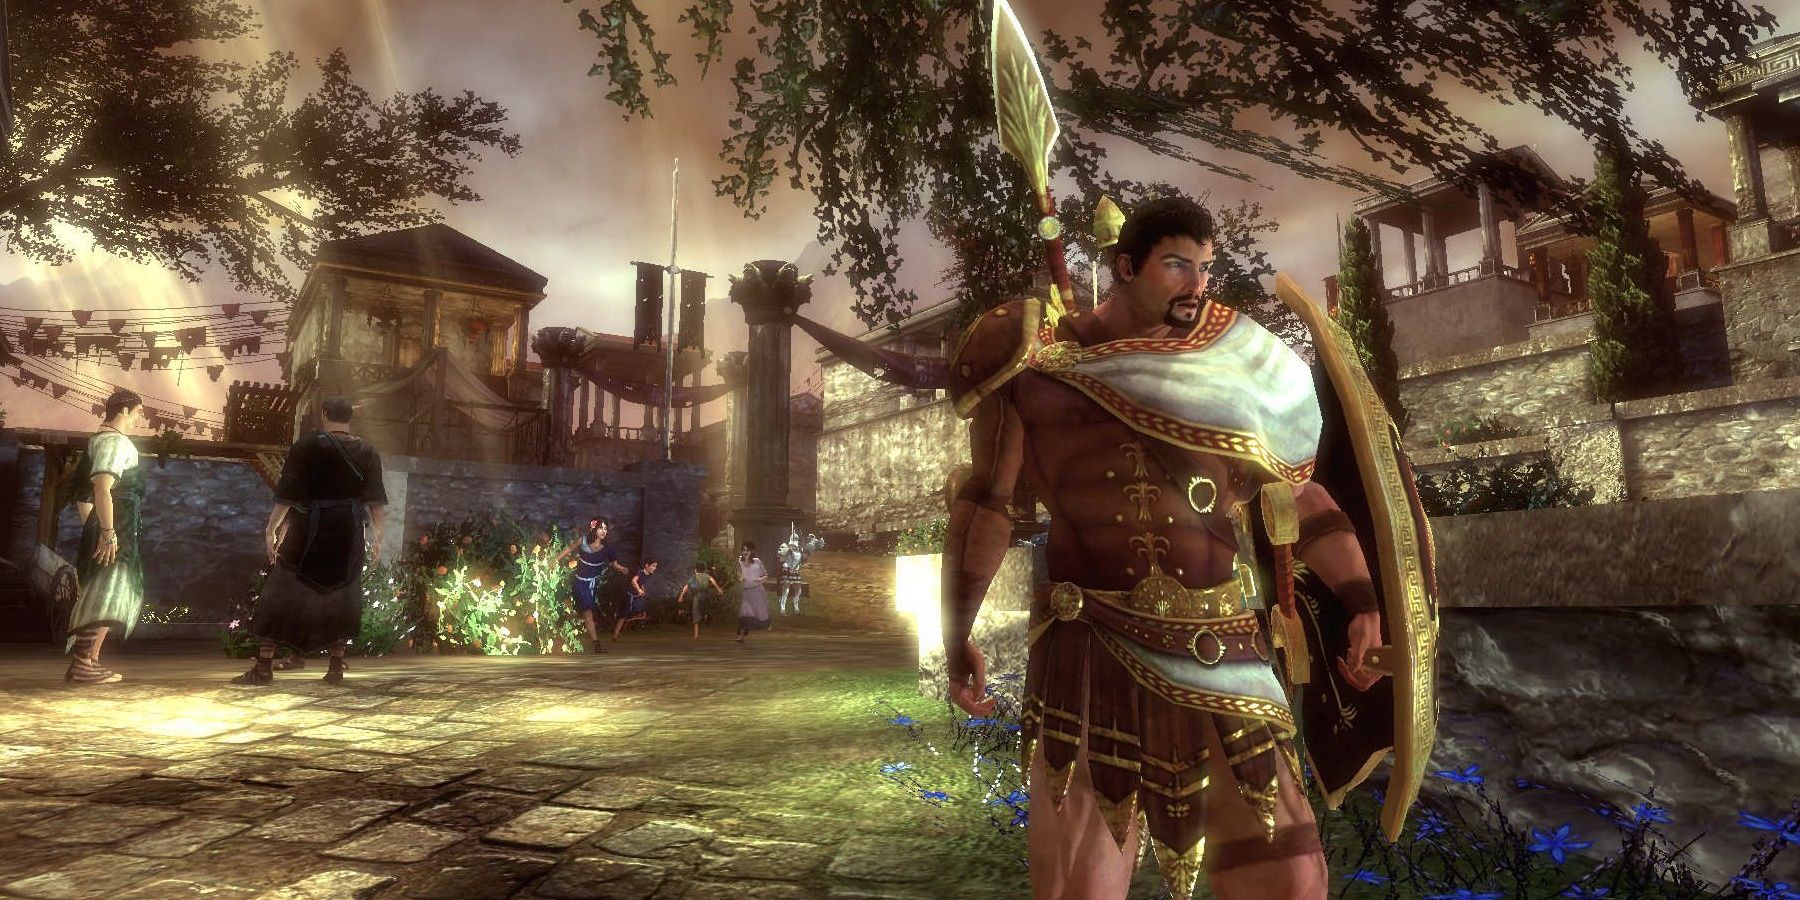 Jason holding a shield in a garden in Rise of the Argonauts